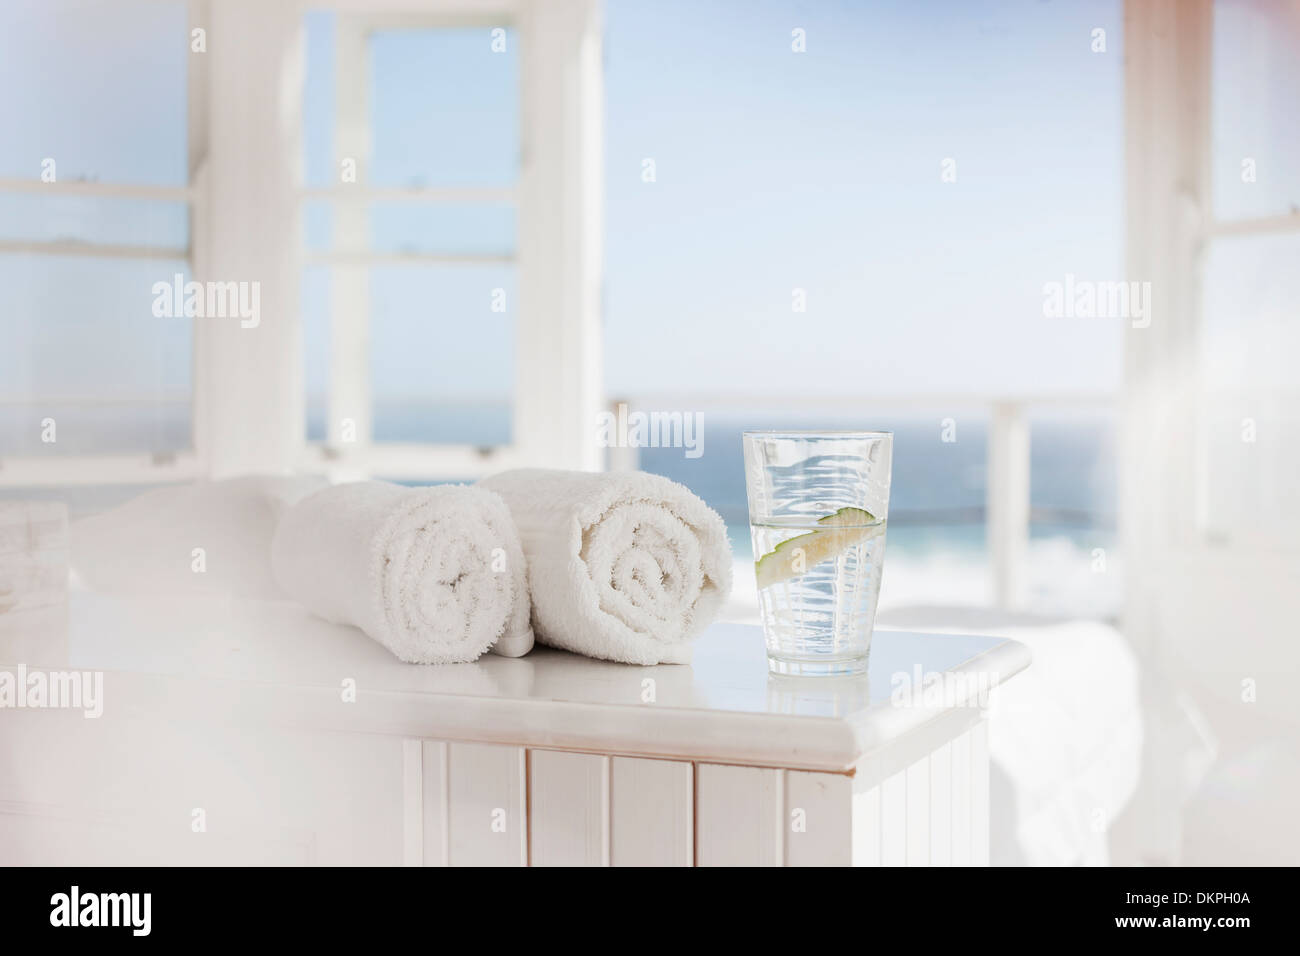 Glass of water and towels on table Stock Photo